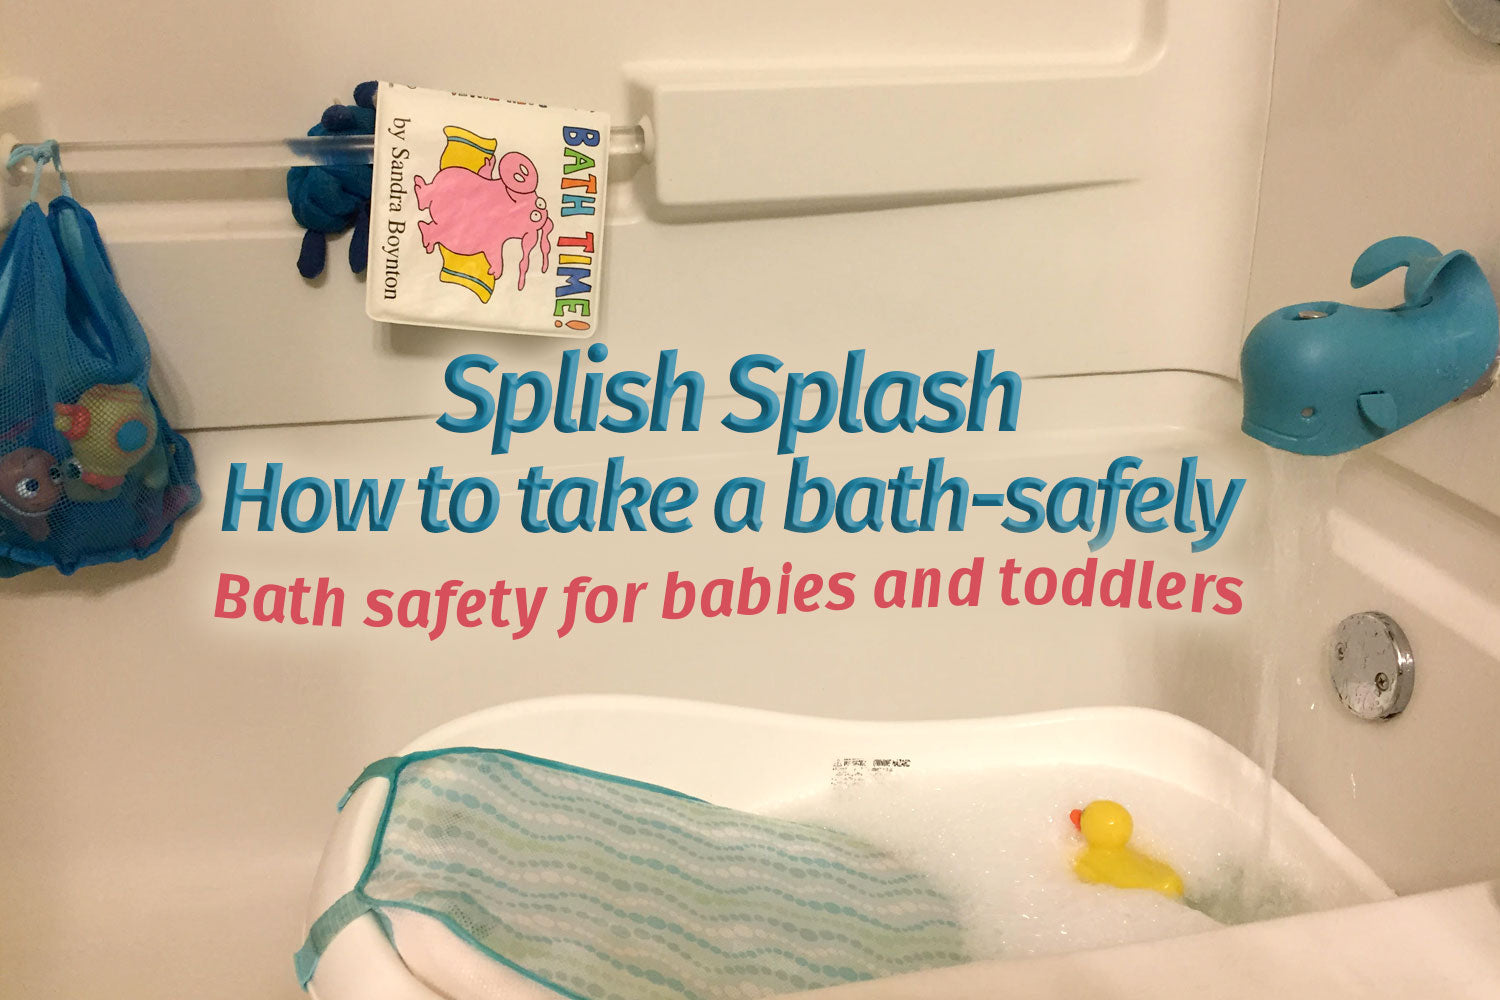 Bath safety for babies and toddlers